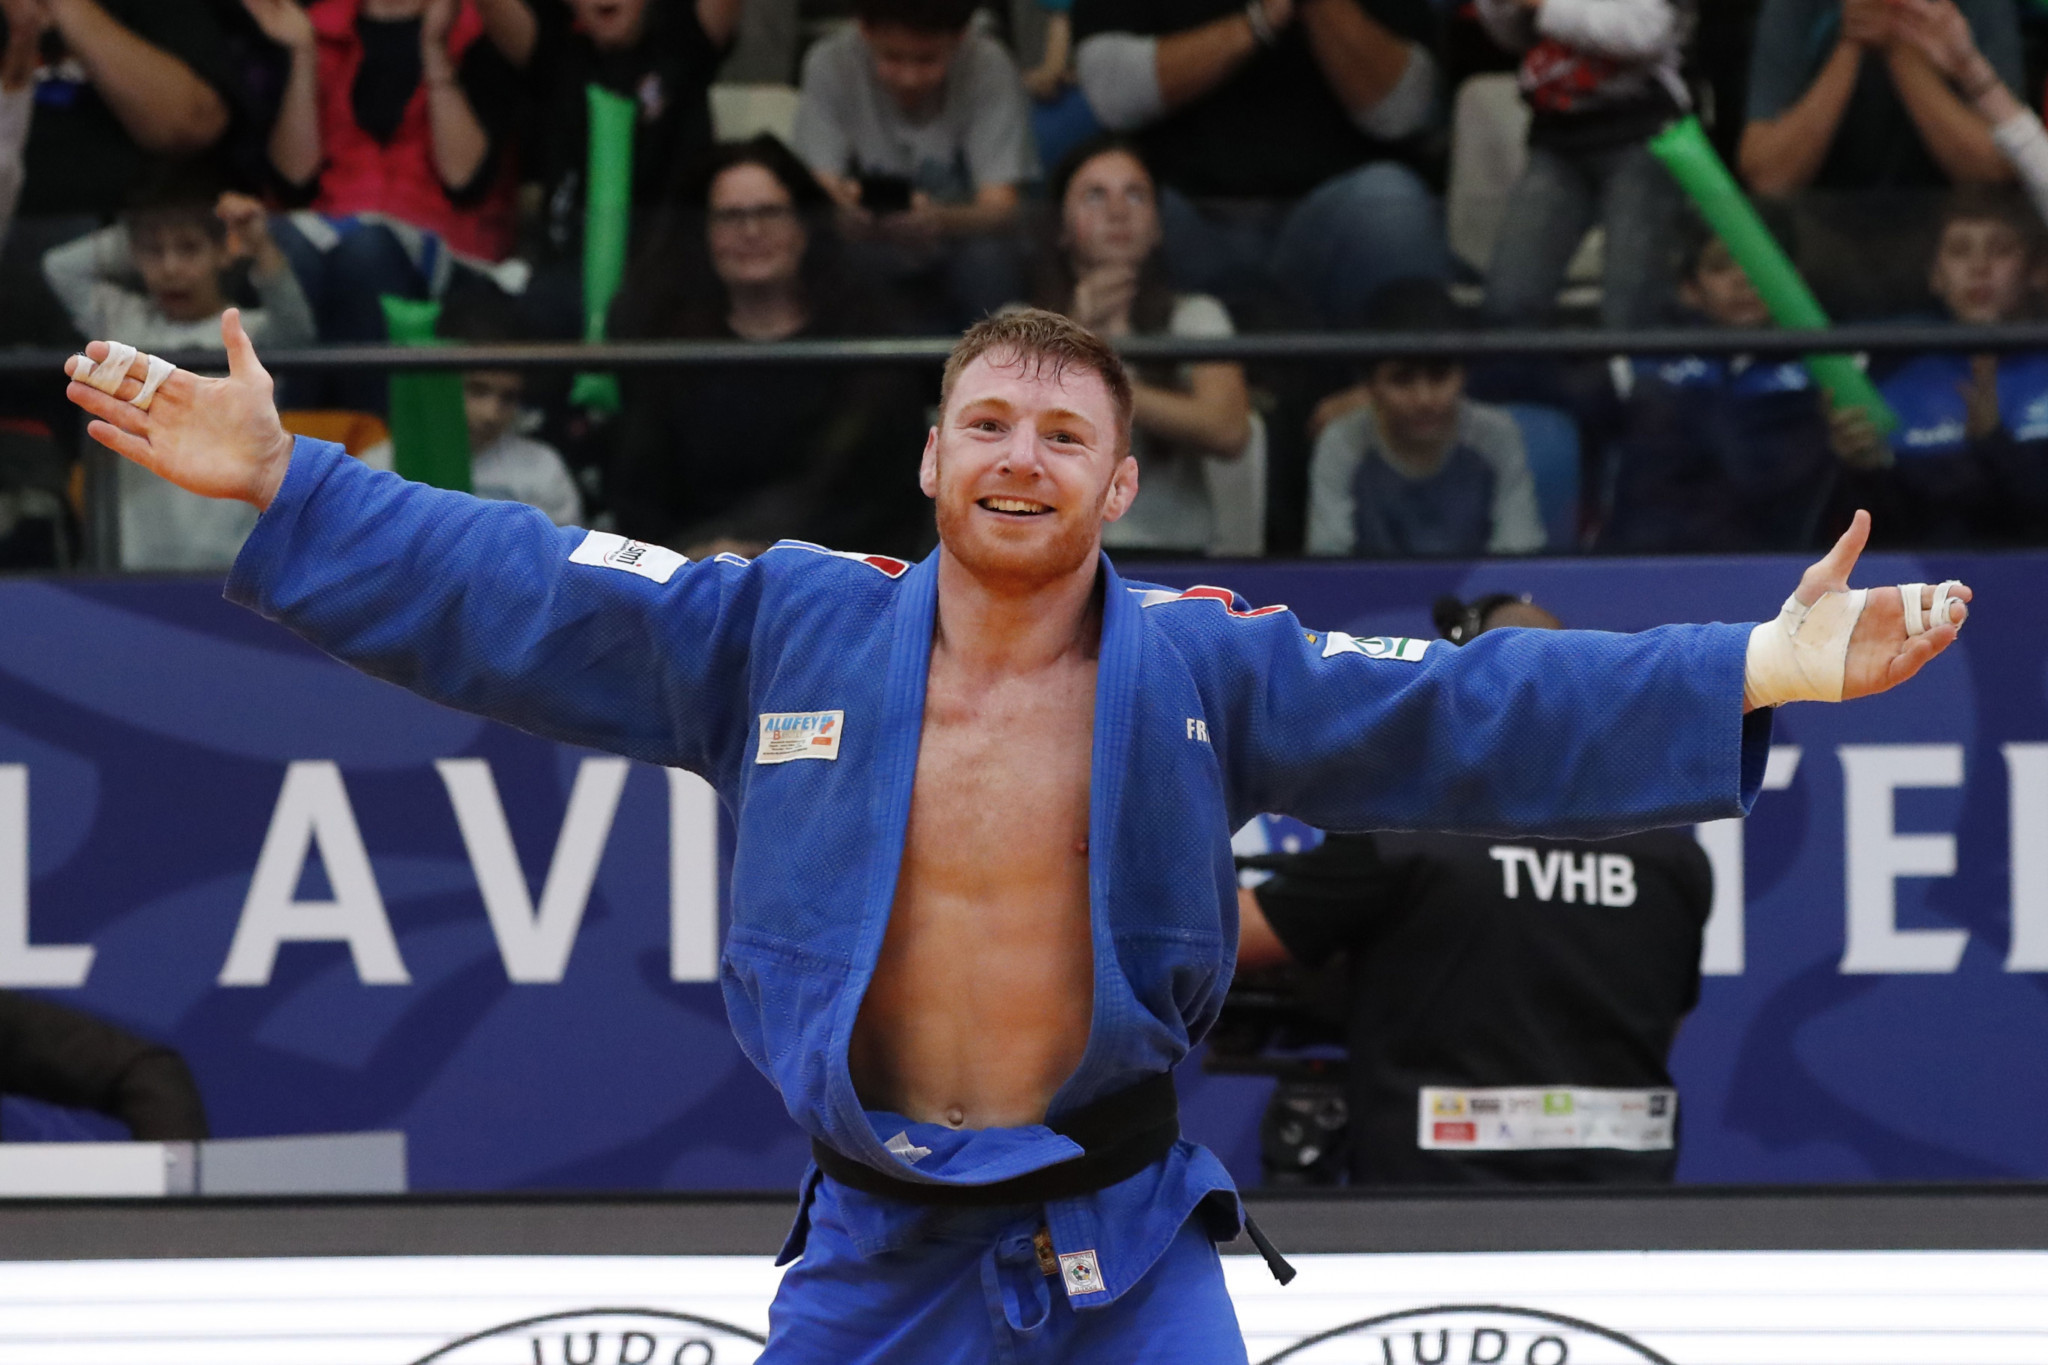 Axel Clerget claimed one of France's two golds today at the IJF Tel Aviv Grand Prix ©Getty Images